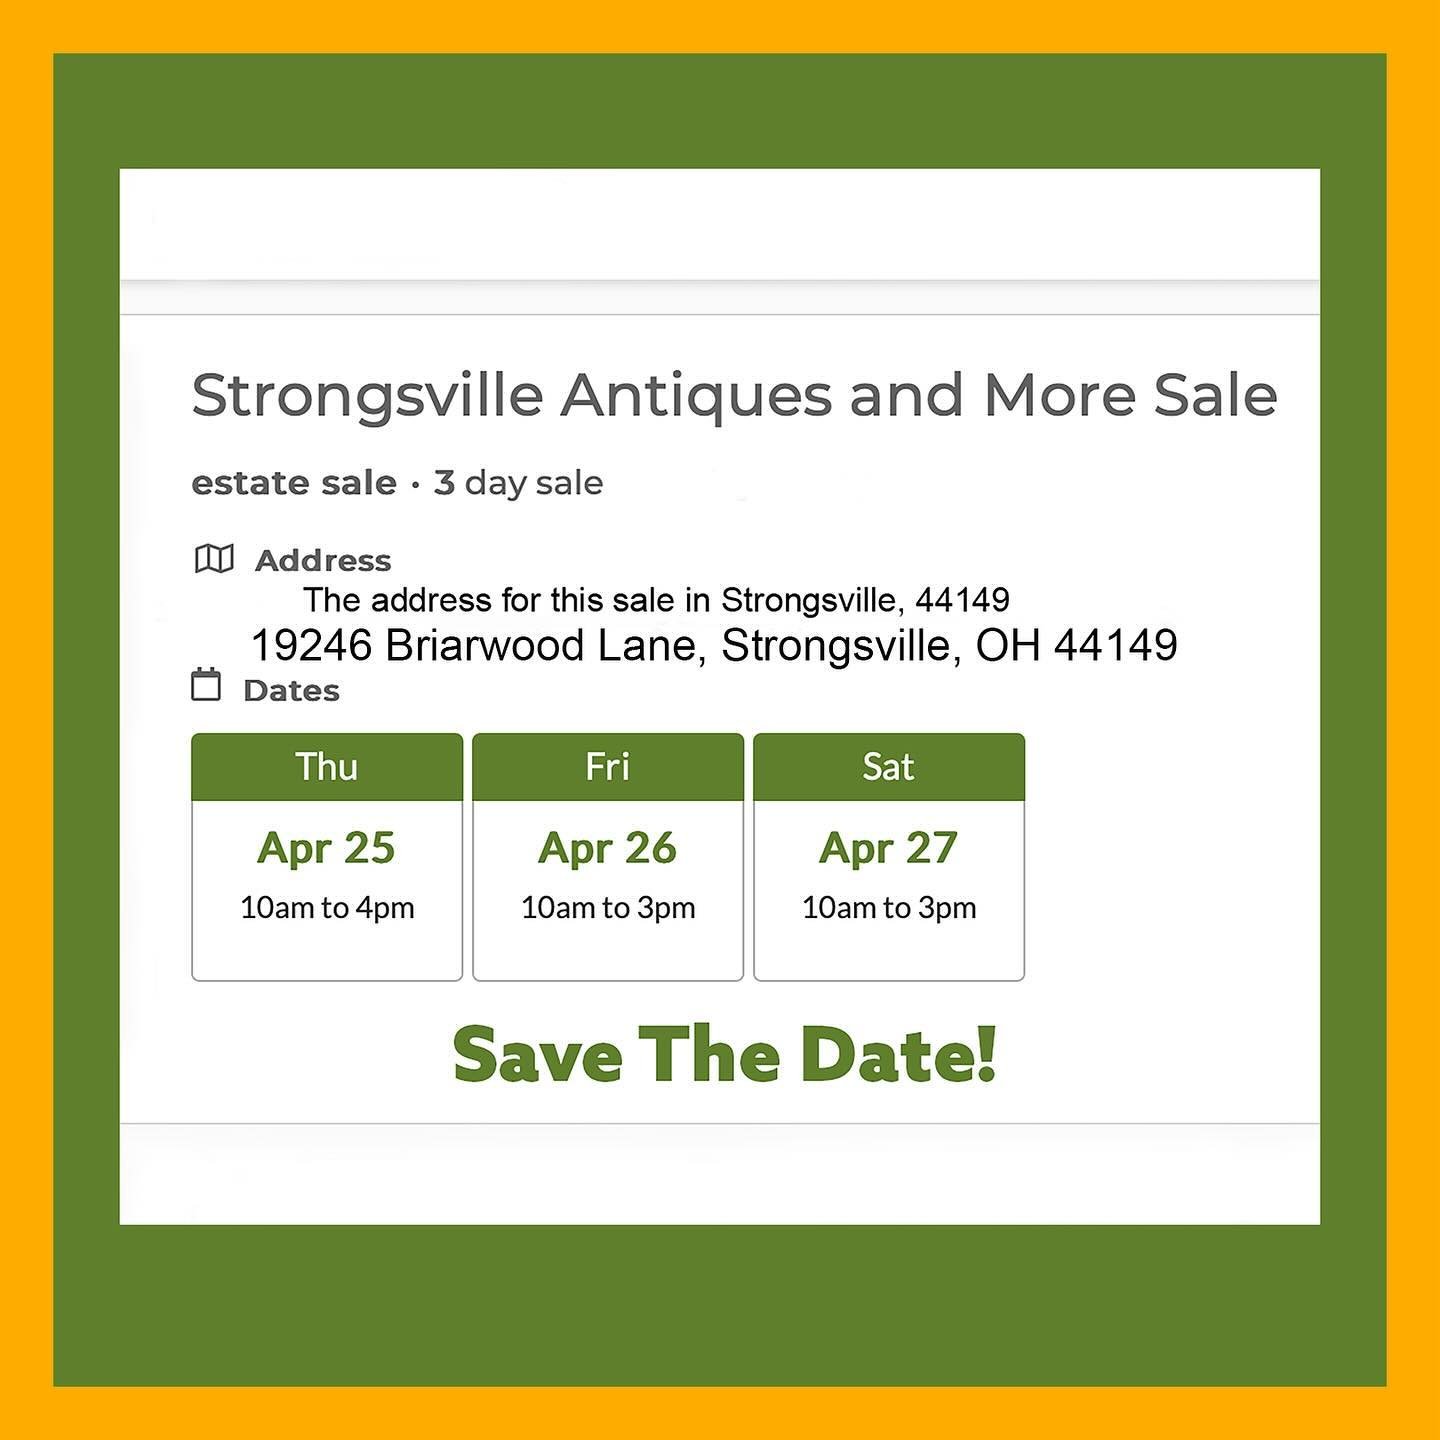 Starts tomorrow, Thursday 4/25/24. All Things For You&rsquo;s Strongsville estate sale runs 4/25-4/27/24 in Strongsville 44149. Visit this fun All Things For You estate sale for some wonderful treasures. 
Check out the web address below for more deta